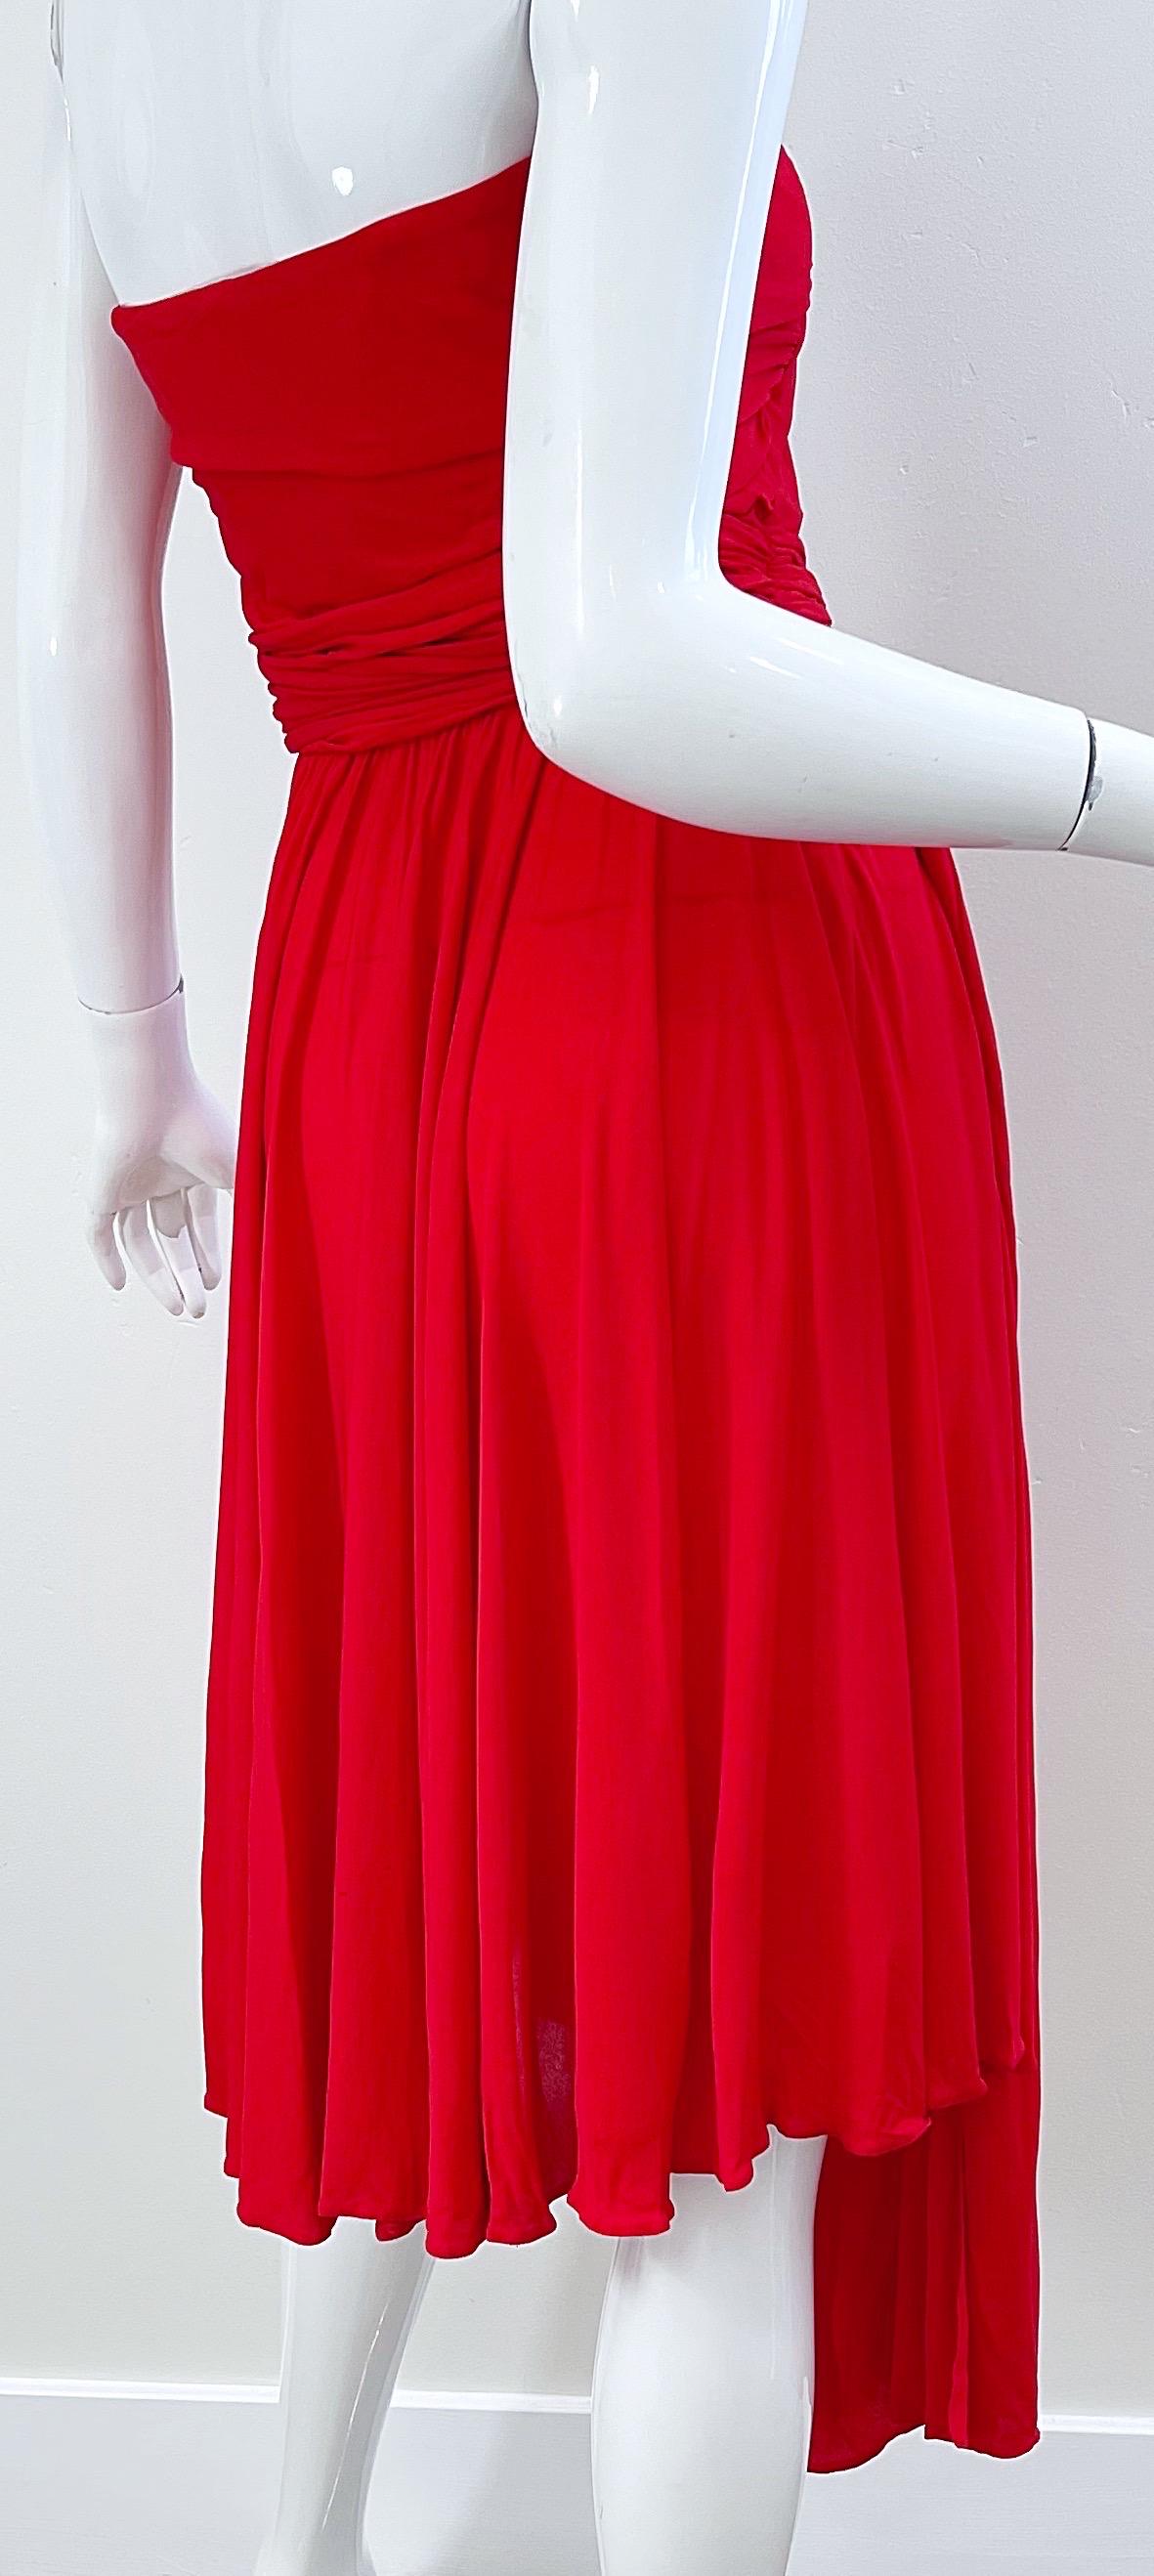 Runway Yves Saint Laurent S/S 1989 Lipstick Red Rayon Jersey Strapless 80s Dress For Sale 3